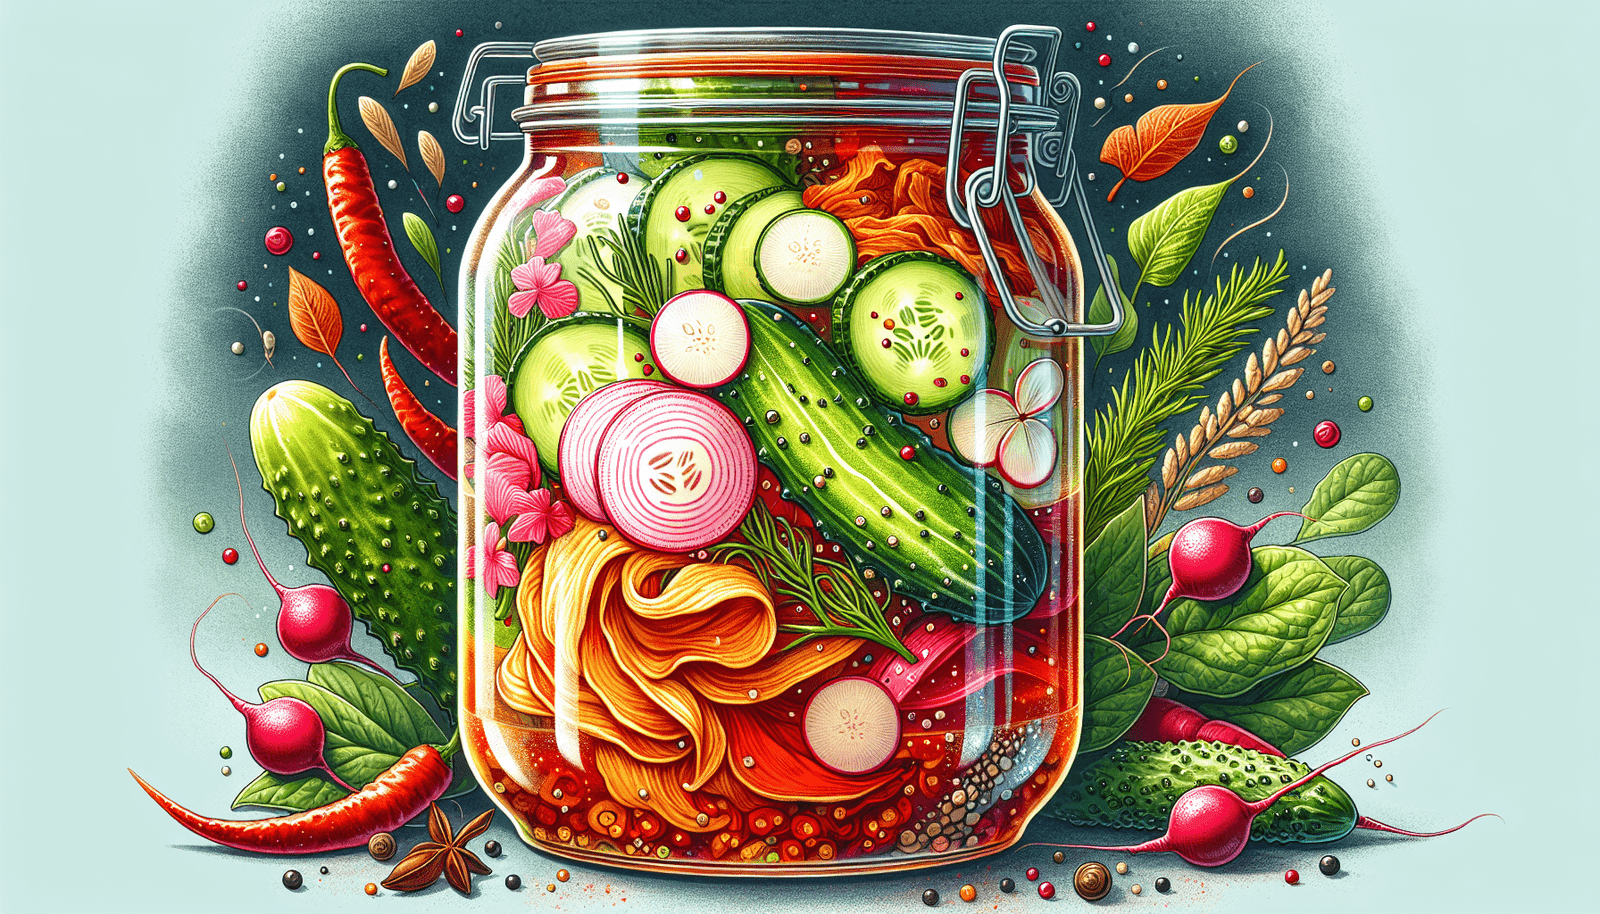 What Are The Current Trends In Incorporating Korean Flavors Into Pickles And Ferments?